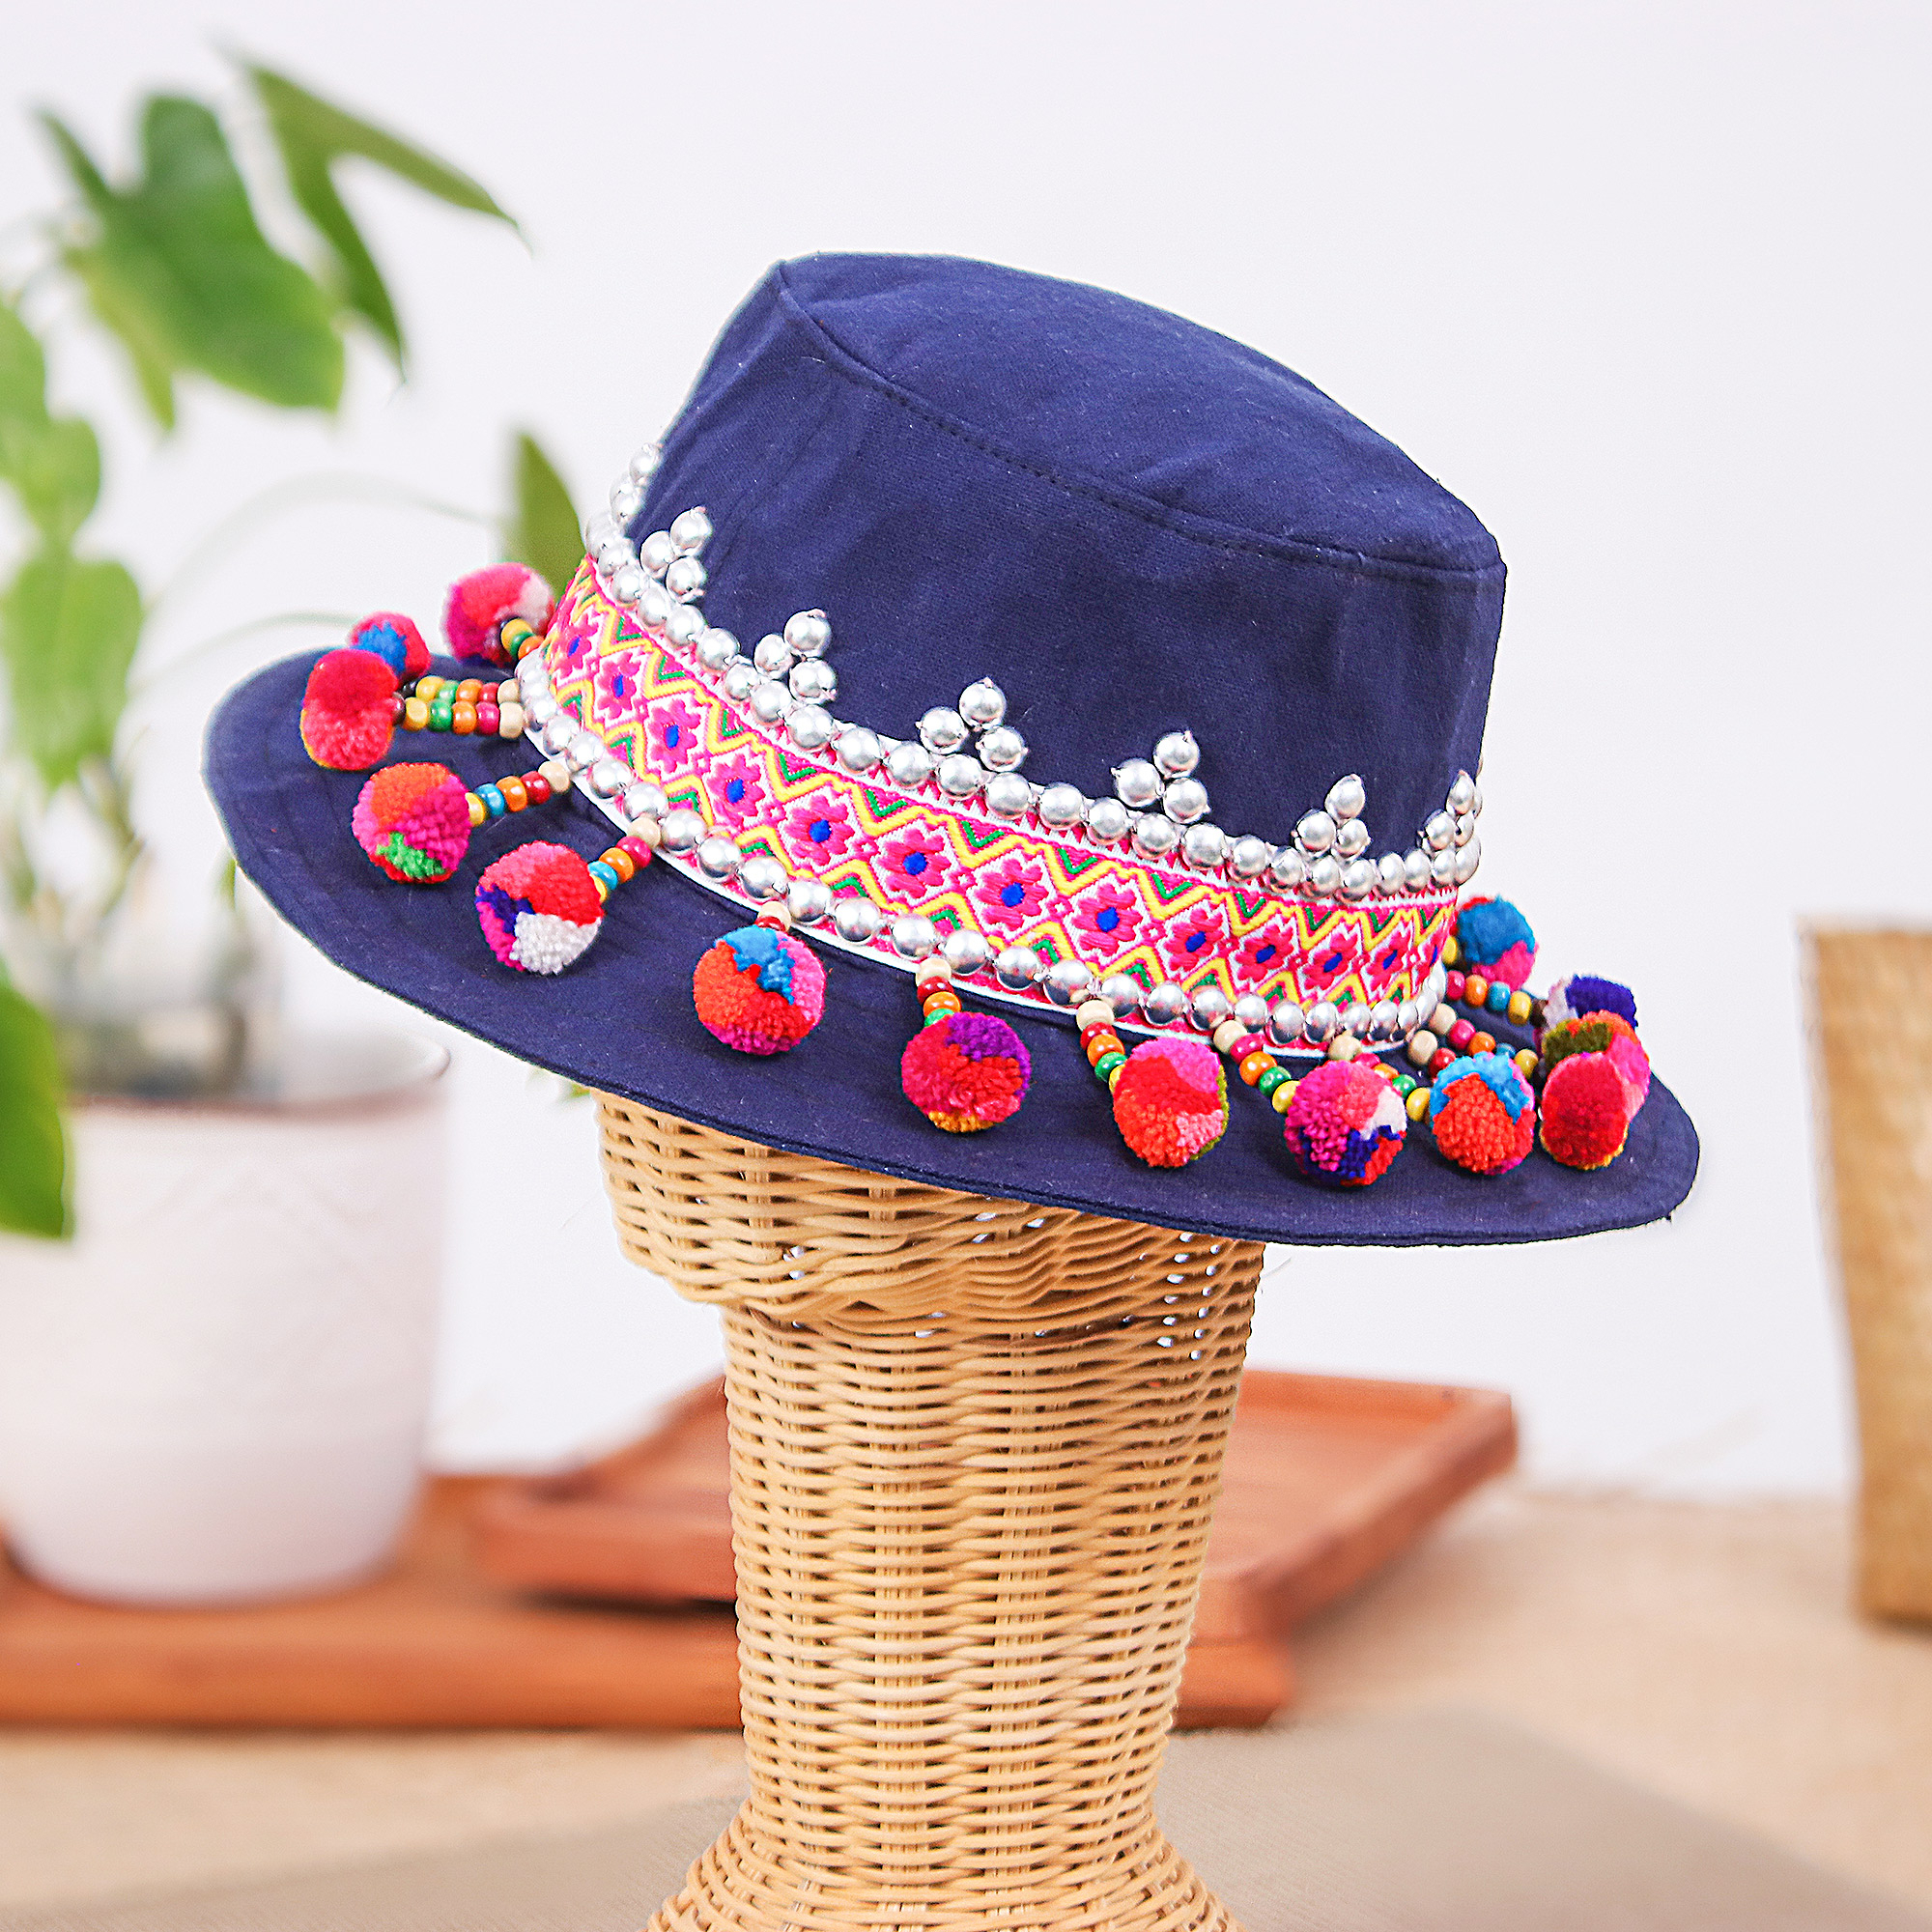 Hill Tribe-Themed Floral Embellished Navy Cotton Hat - Blue Hills